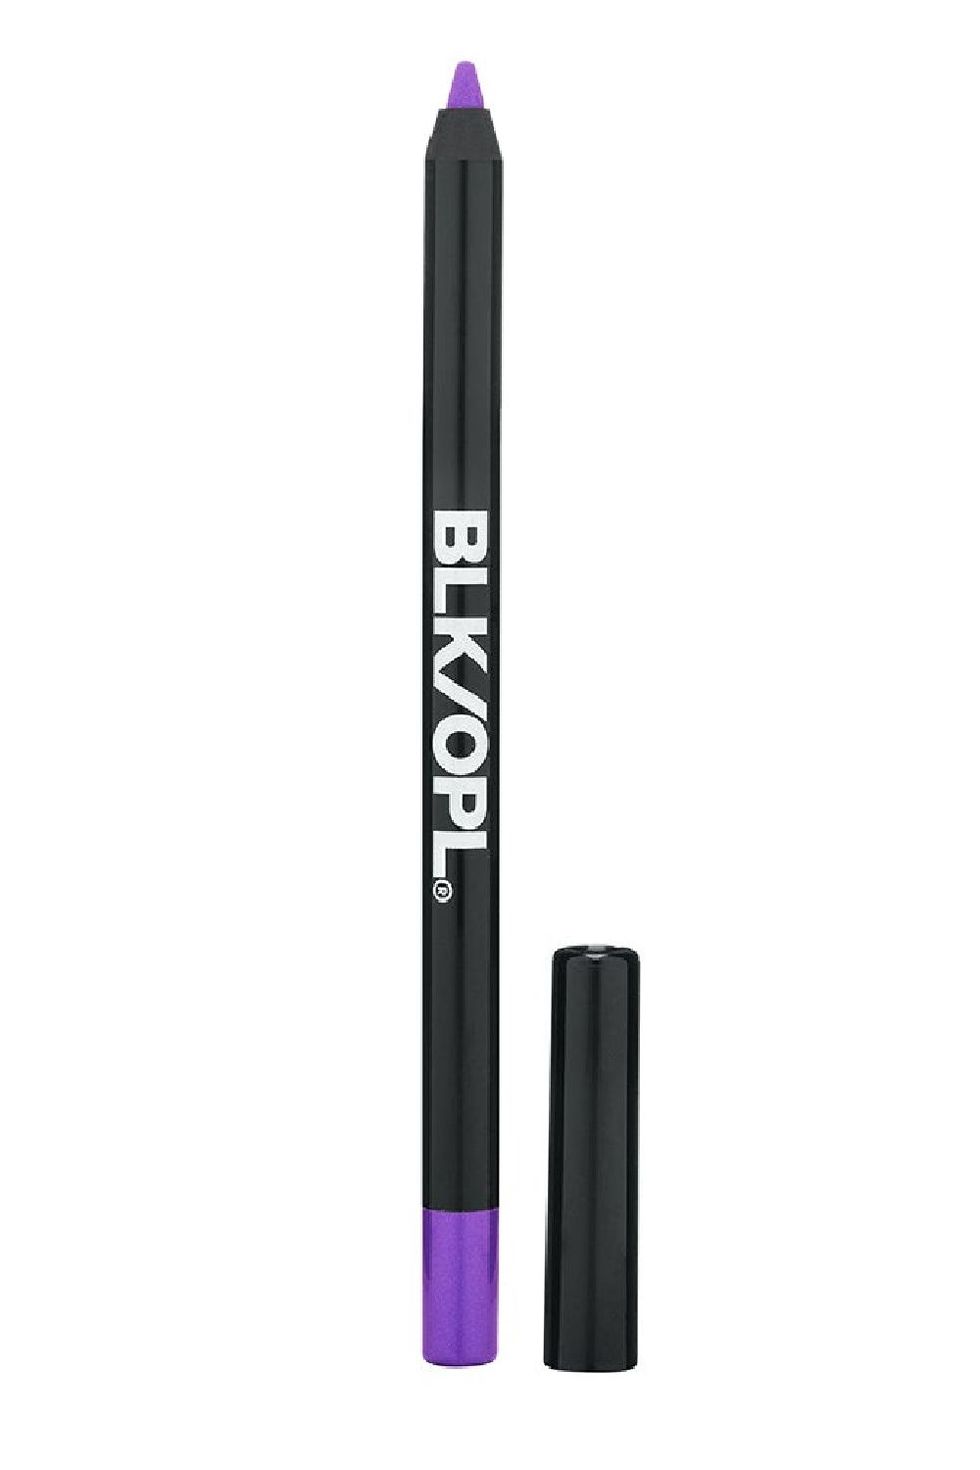 Sephora Peacock Blue (50) 12-Hour Contour Eyeliner Pencil (2021) Review &  Swatches